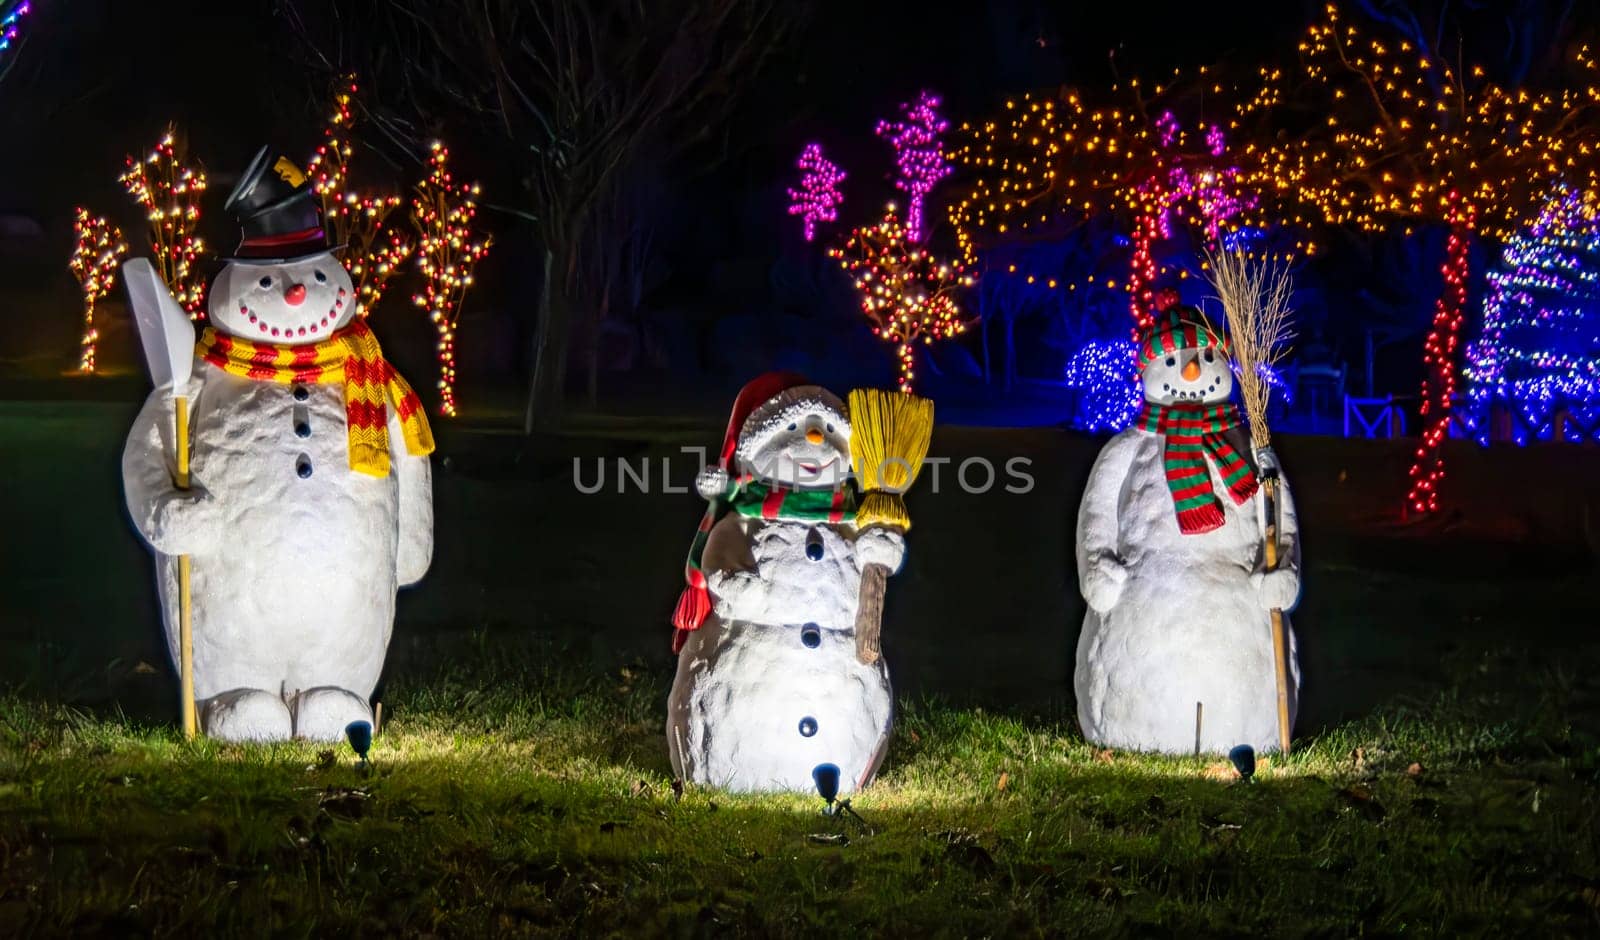 Three Illuminated Snowman Figures With Scarves And Hats Holding Brooms, Displayed At Night With Trees Decorated With Colorful Christmas Lights In The Background.